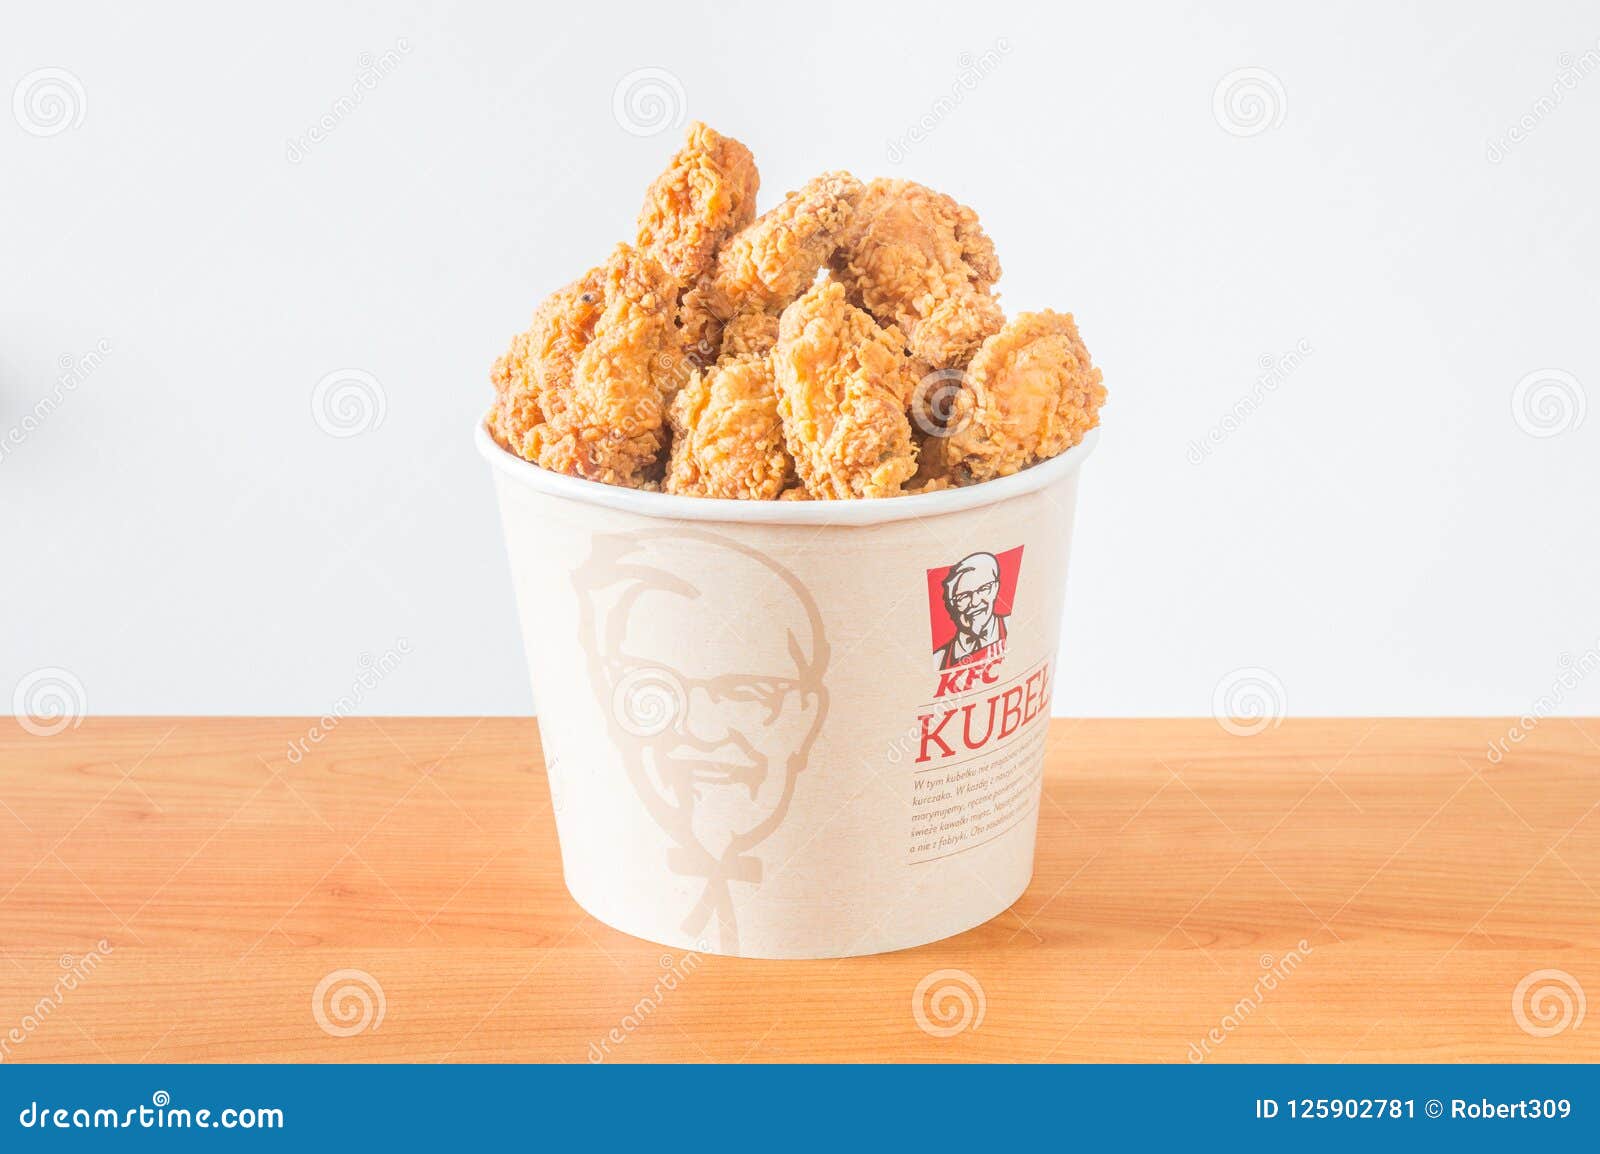 A Lots Of Kfc Chicken Hot Wings In Bucket Of Kfc Kentucky Fried Chicken Fast Food Editorial Photo Image Of Chicken Fried 125902781